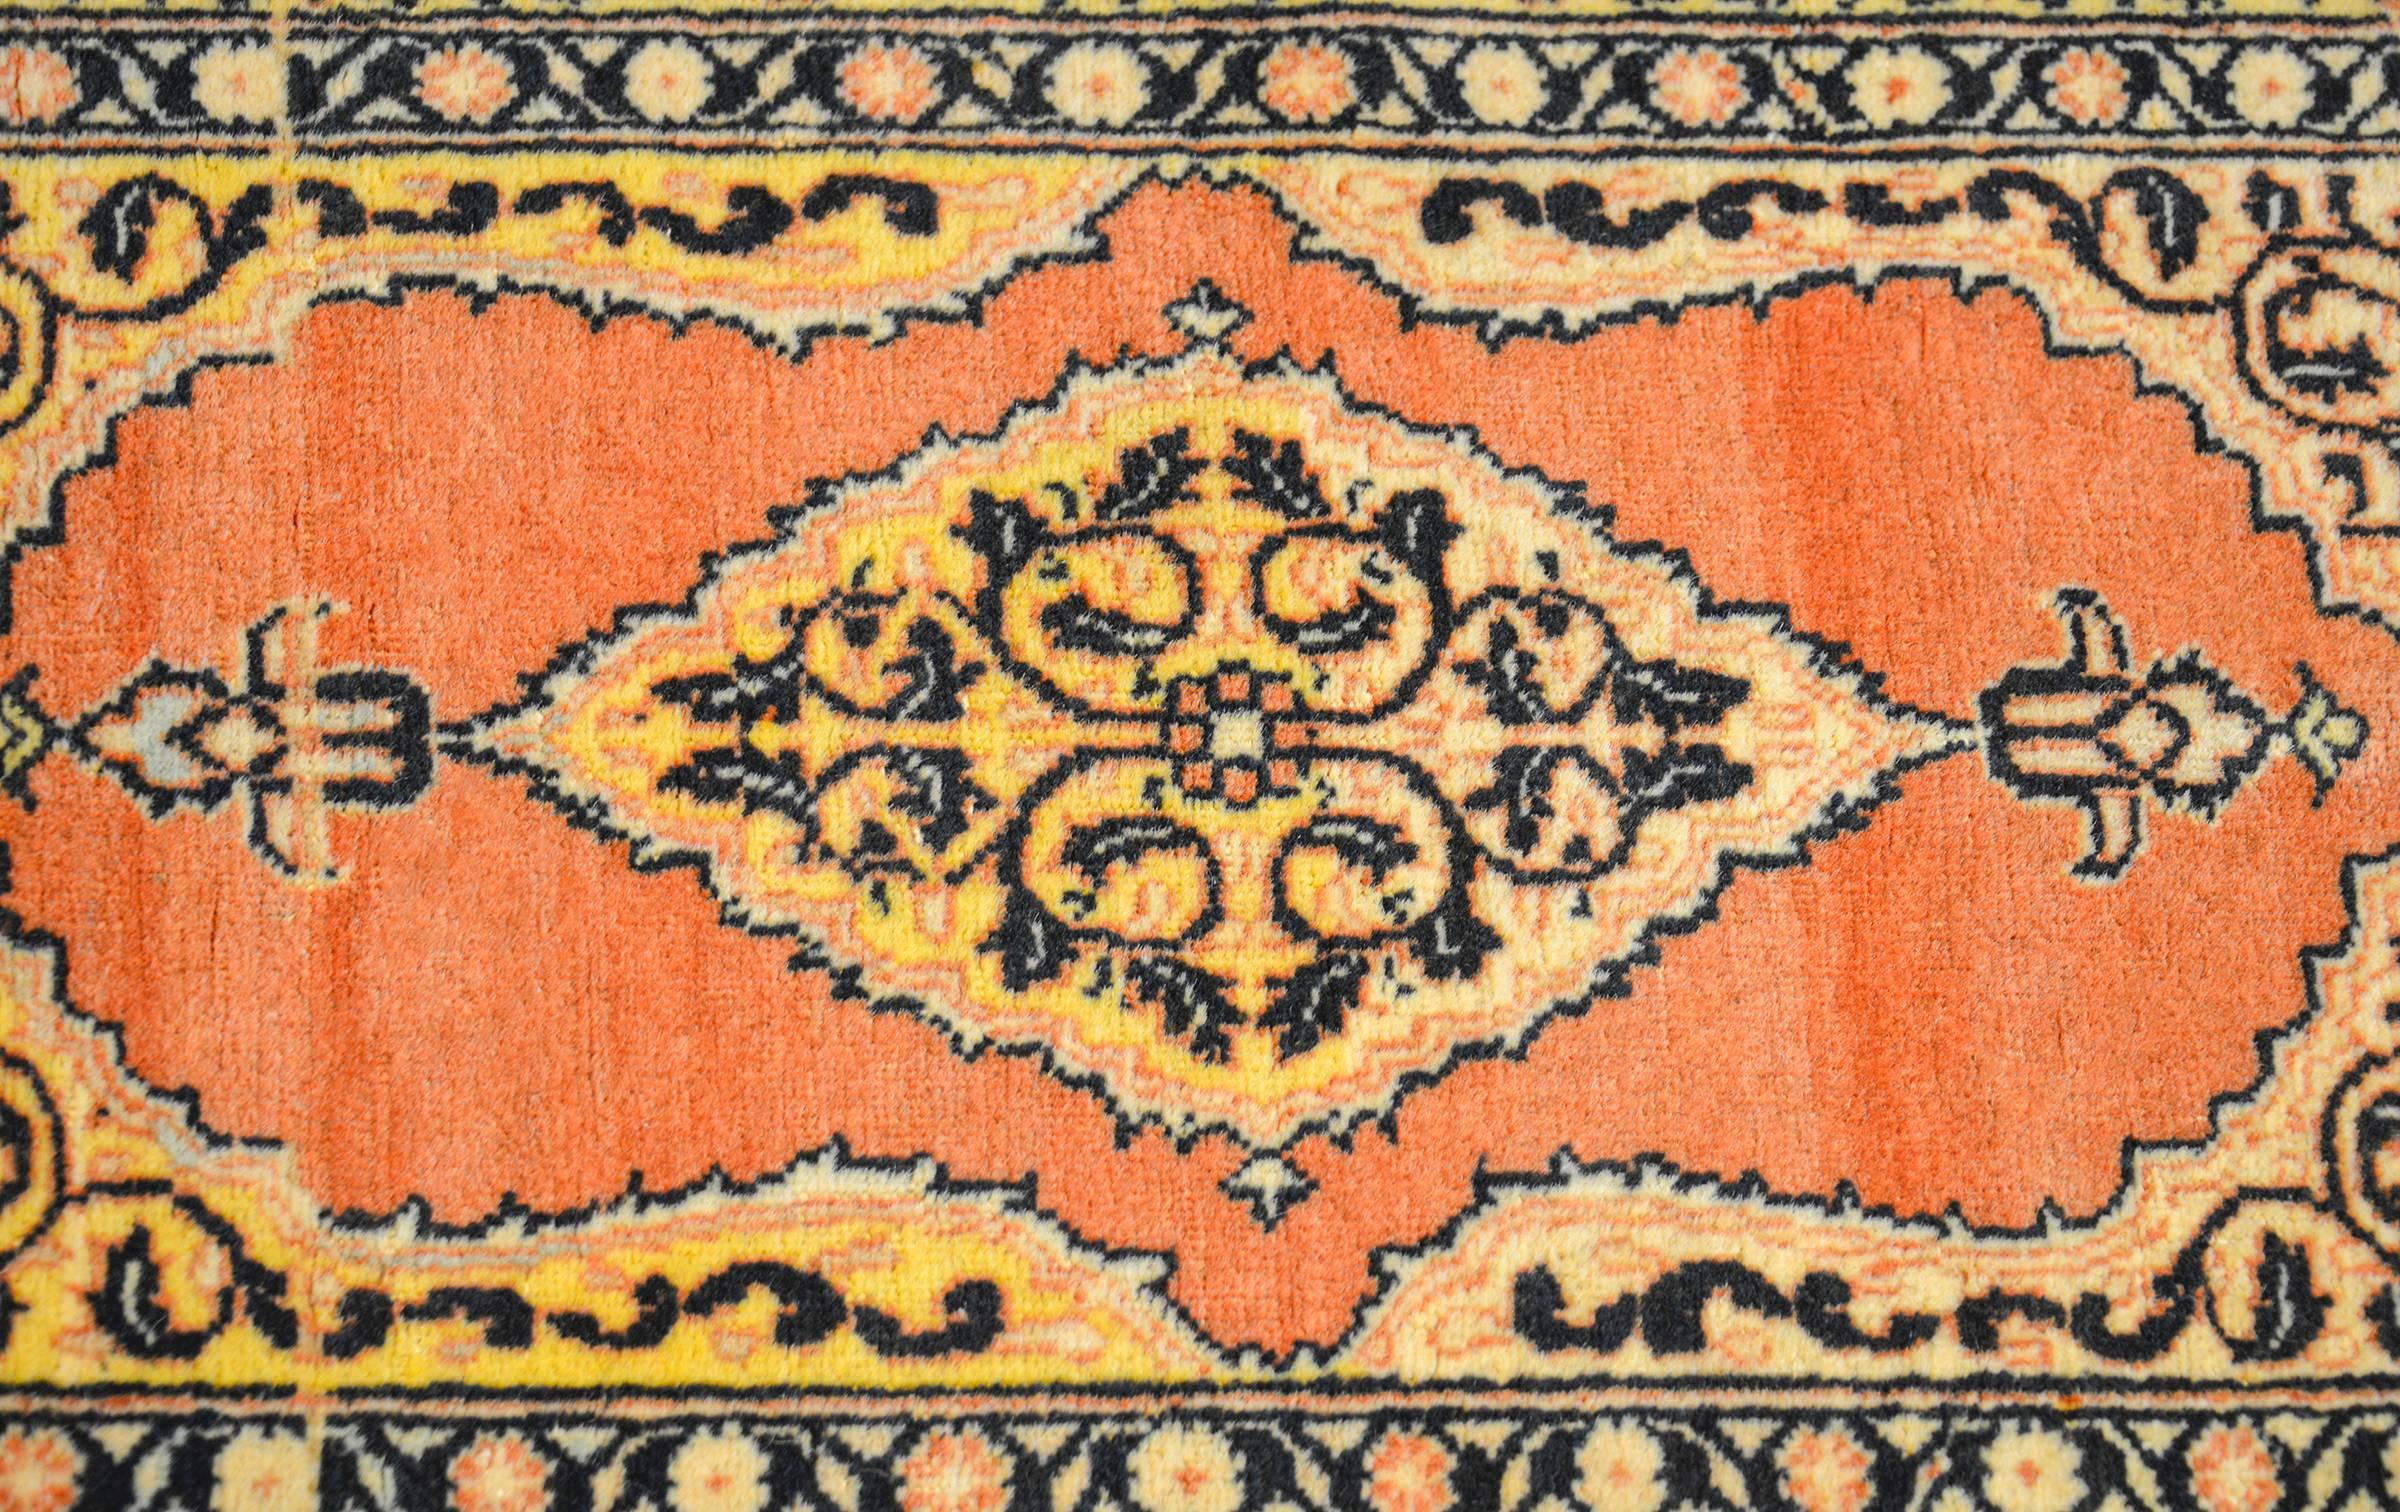 A 19th century Persian Tabriz rug of rare design with a doubt-lobed medallions woven in brash orange wool surrounded by an all-over floral and vine pattern woven in black and pink wool. The border blends in with the rest of the overall pattern.